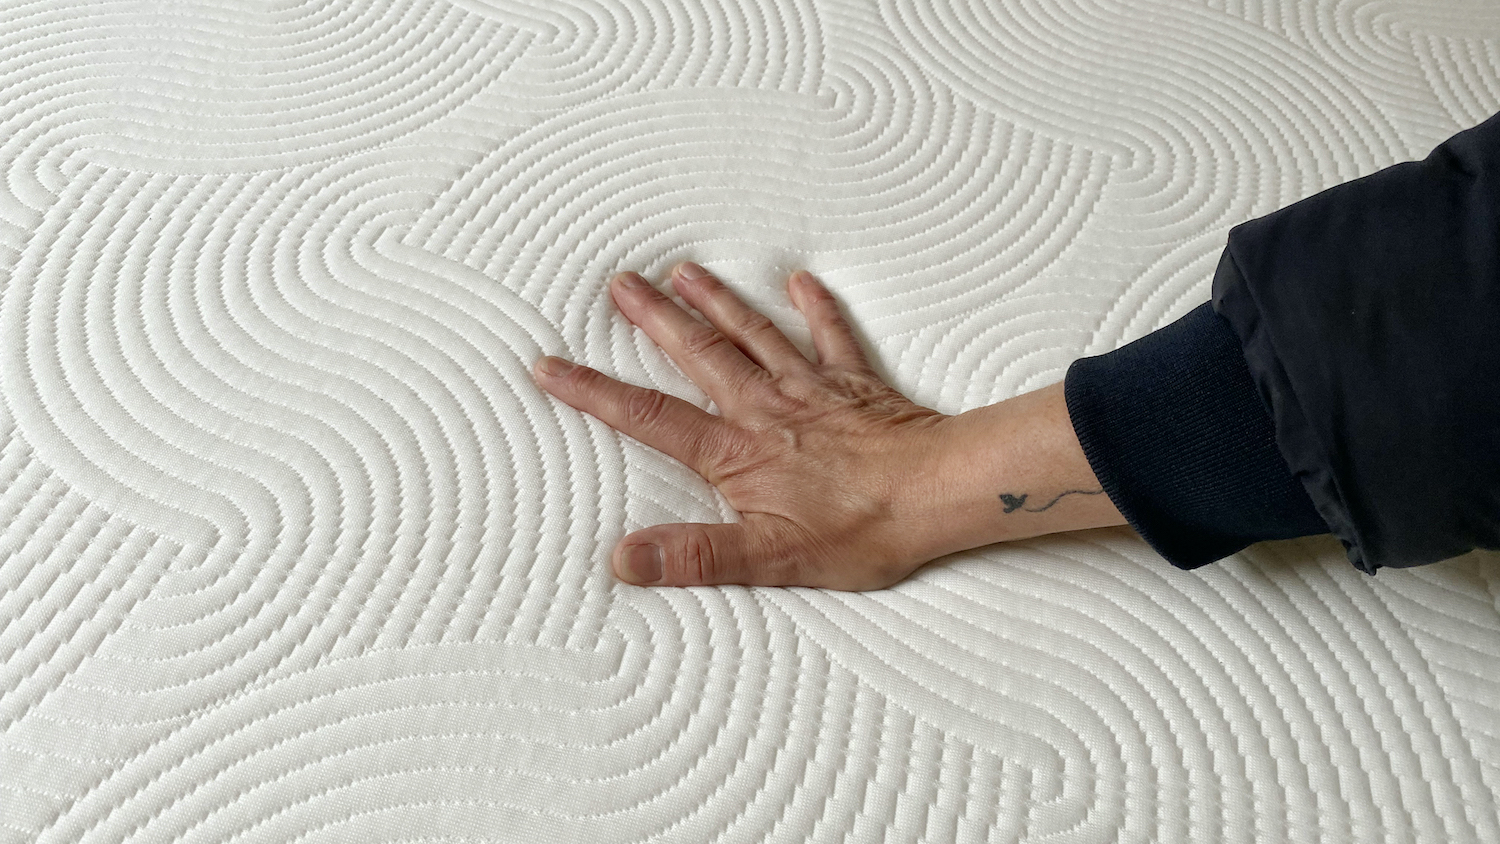 Our lead reviewer, who is wearing a black jumper, places her hand on top of the Brook + Wilde Lux Mattress to see if it remains cool to the touch during a temperature regulation test